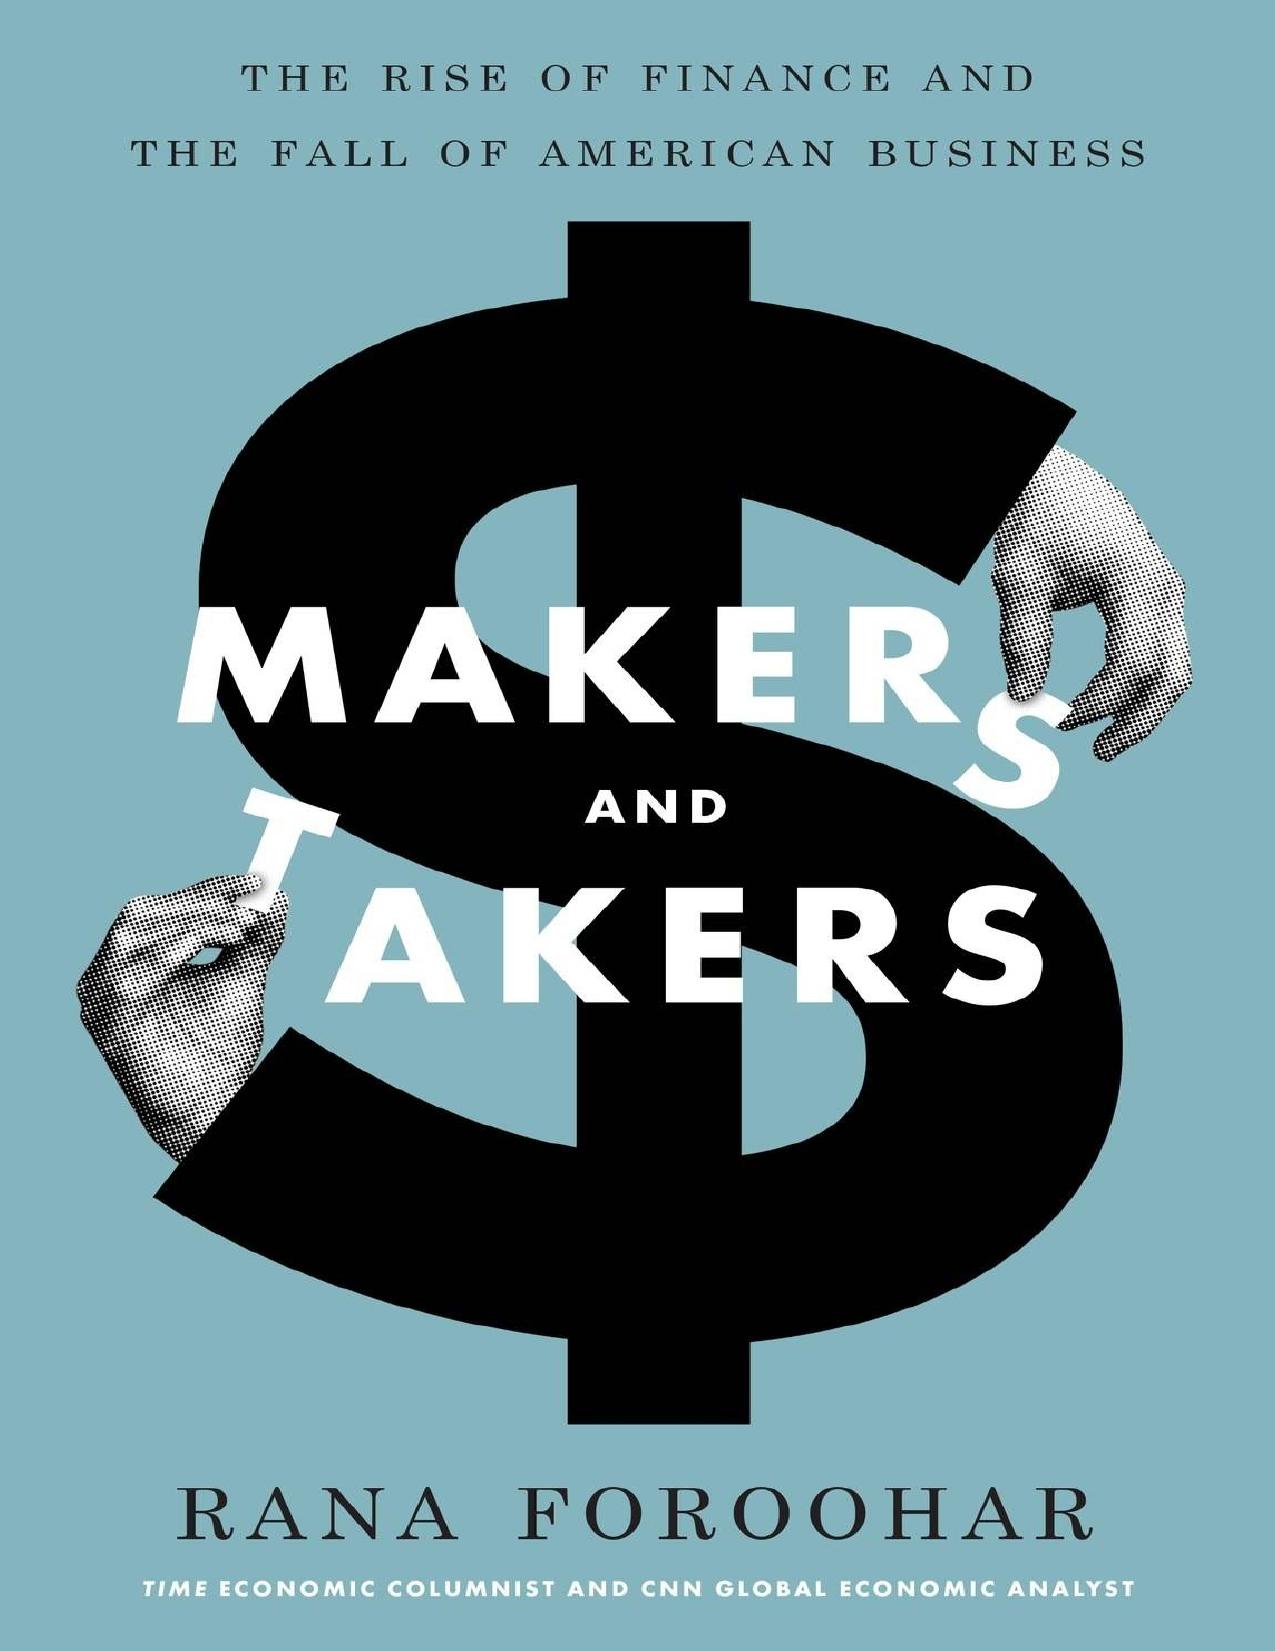 Makers and Takers: The Rise of Finance and the Fall of American Business - PDFDrive.com